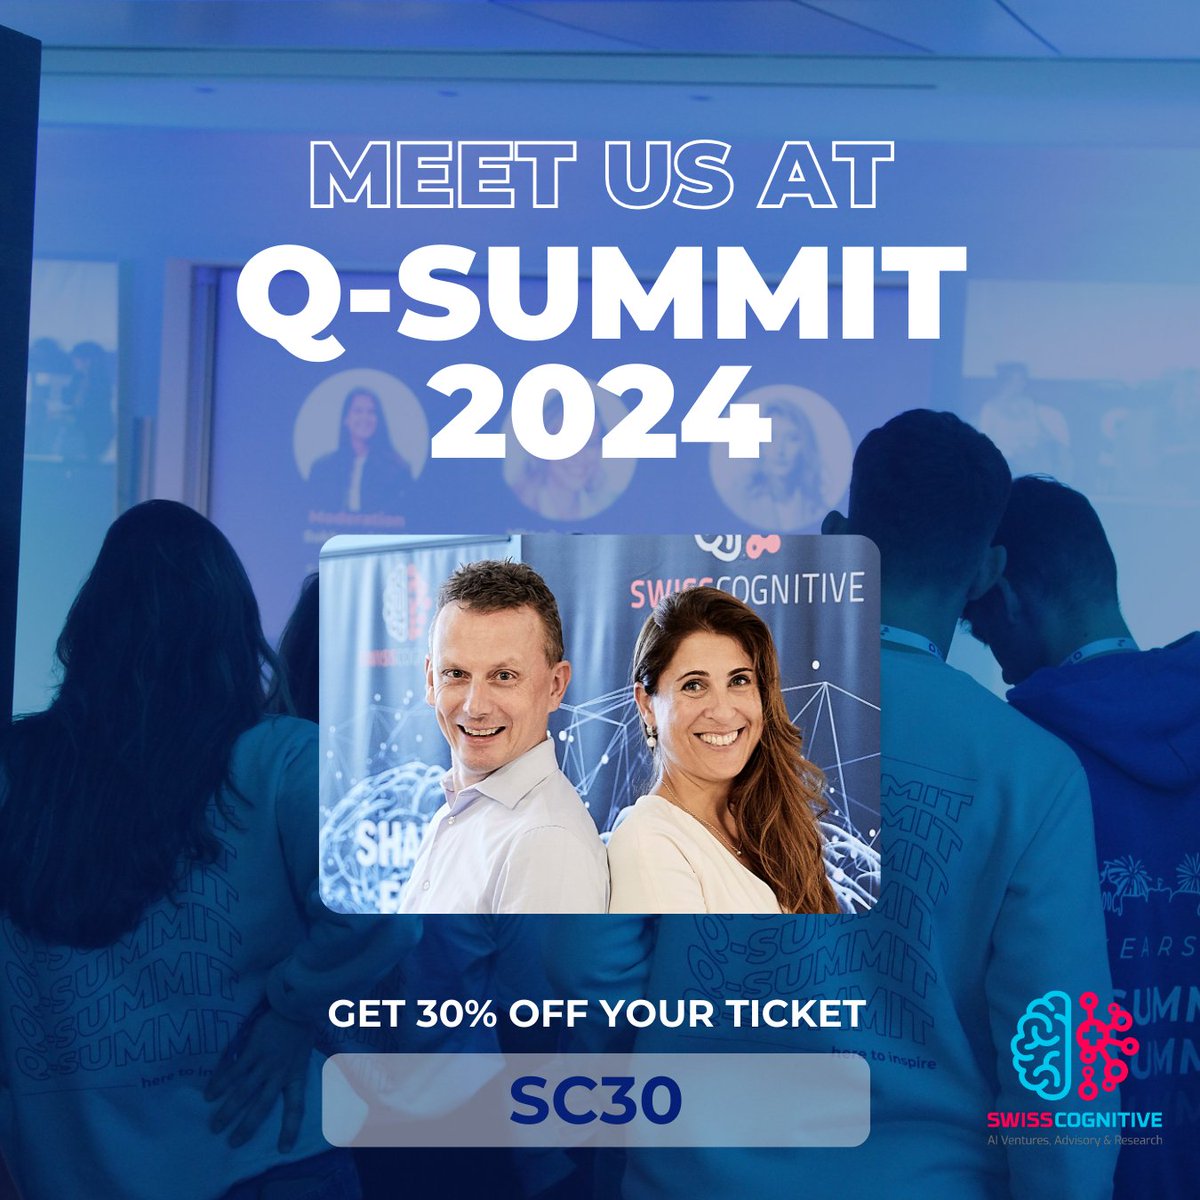 The #QSummit 2024 is where visions soar!🚀 Join @andy_fitze, myself & top industry leaders🧠 +1400 participants, dynamic workshops, pitch battles & more🎉 With @SwissCognitive, we offer 30% off for our AI Enthusiasts🫶 Don't miss: April 4-5, Mannheim🇩🇪 vivenu.com/c/l26d2f5e